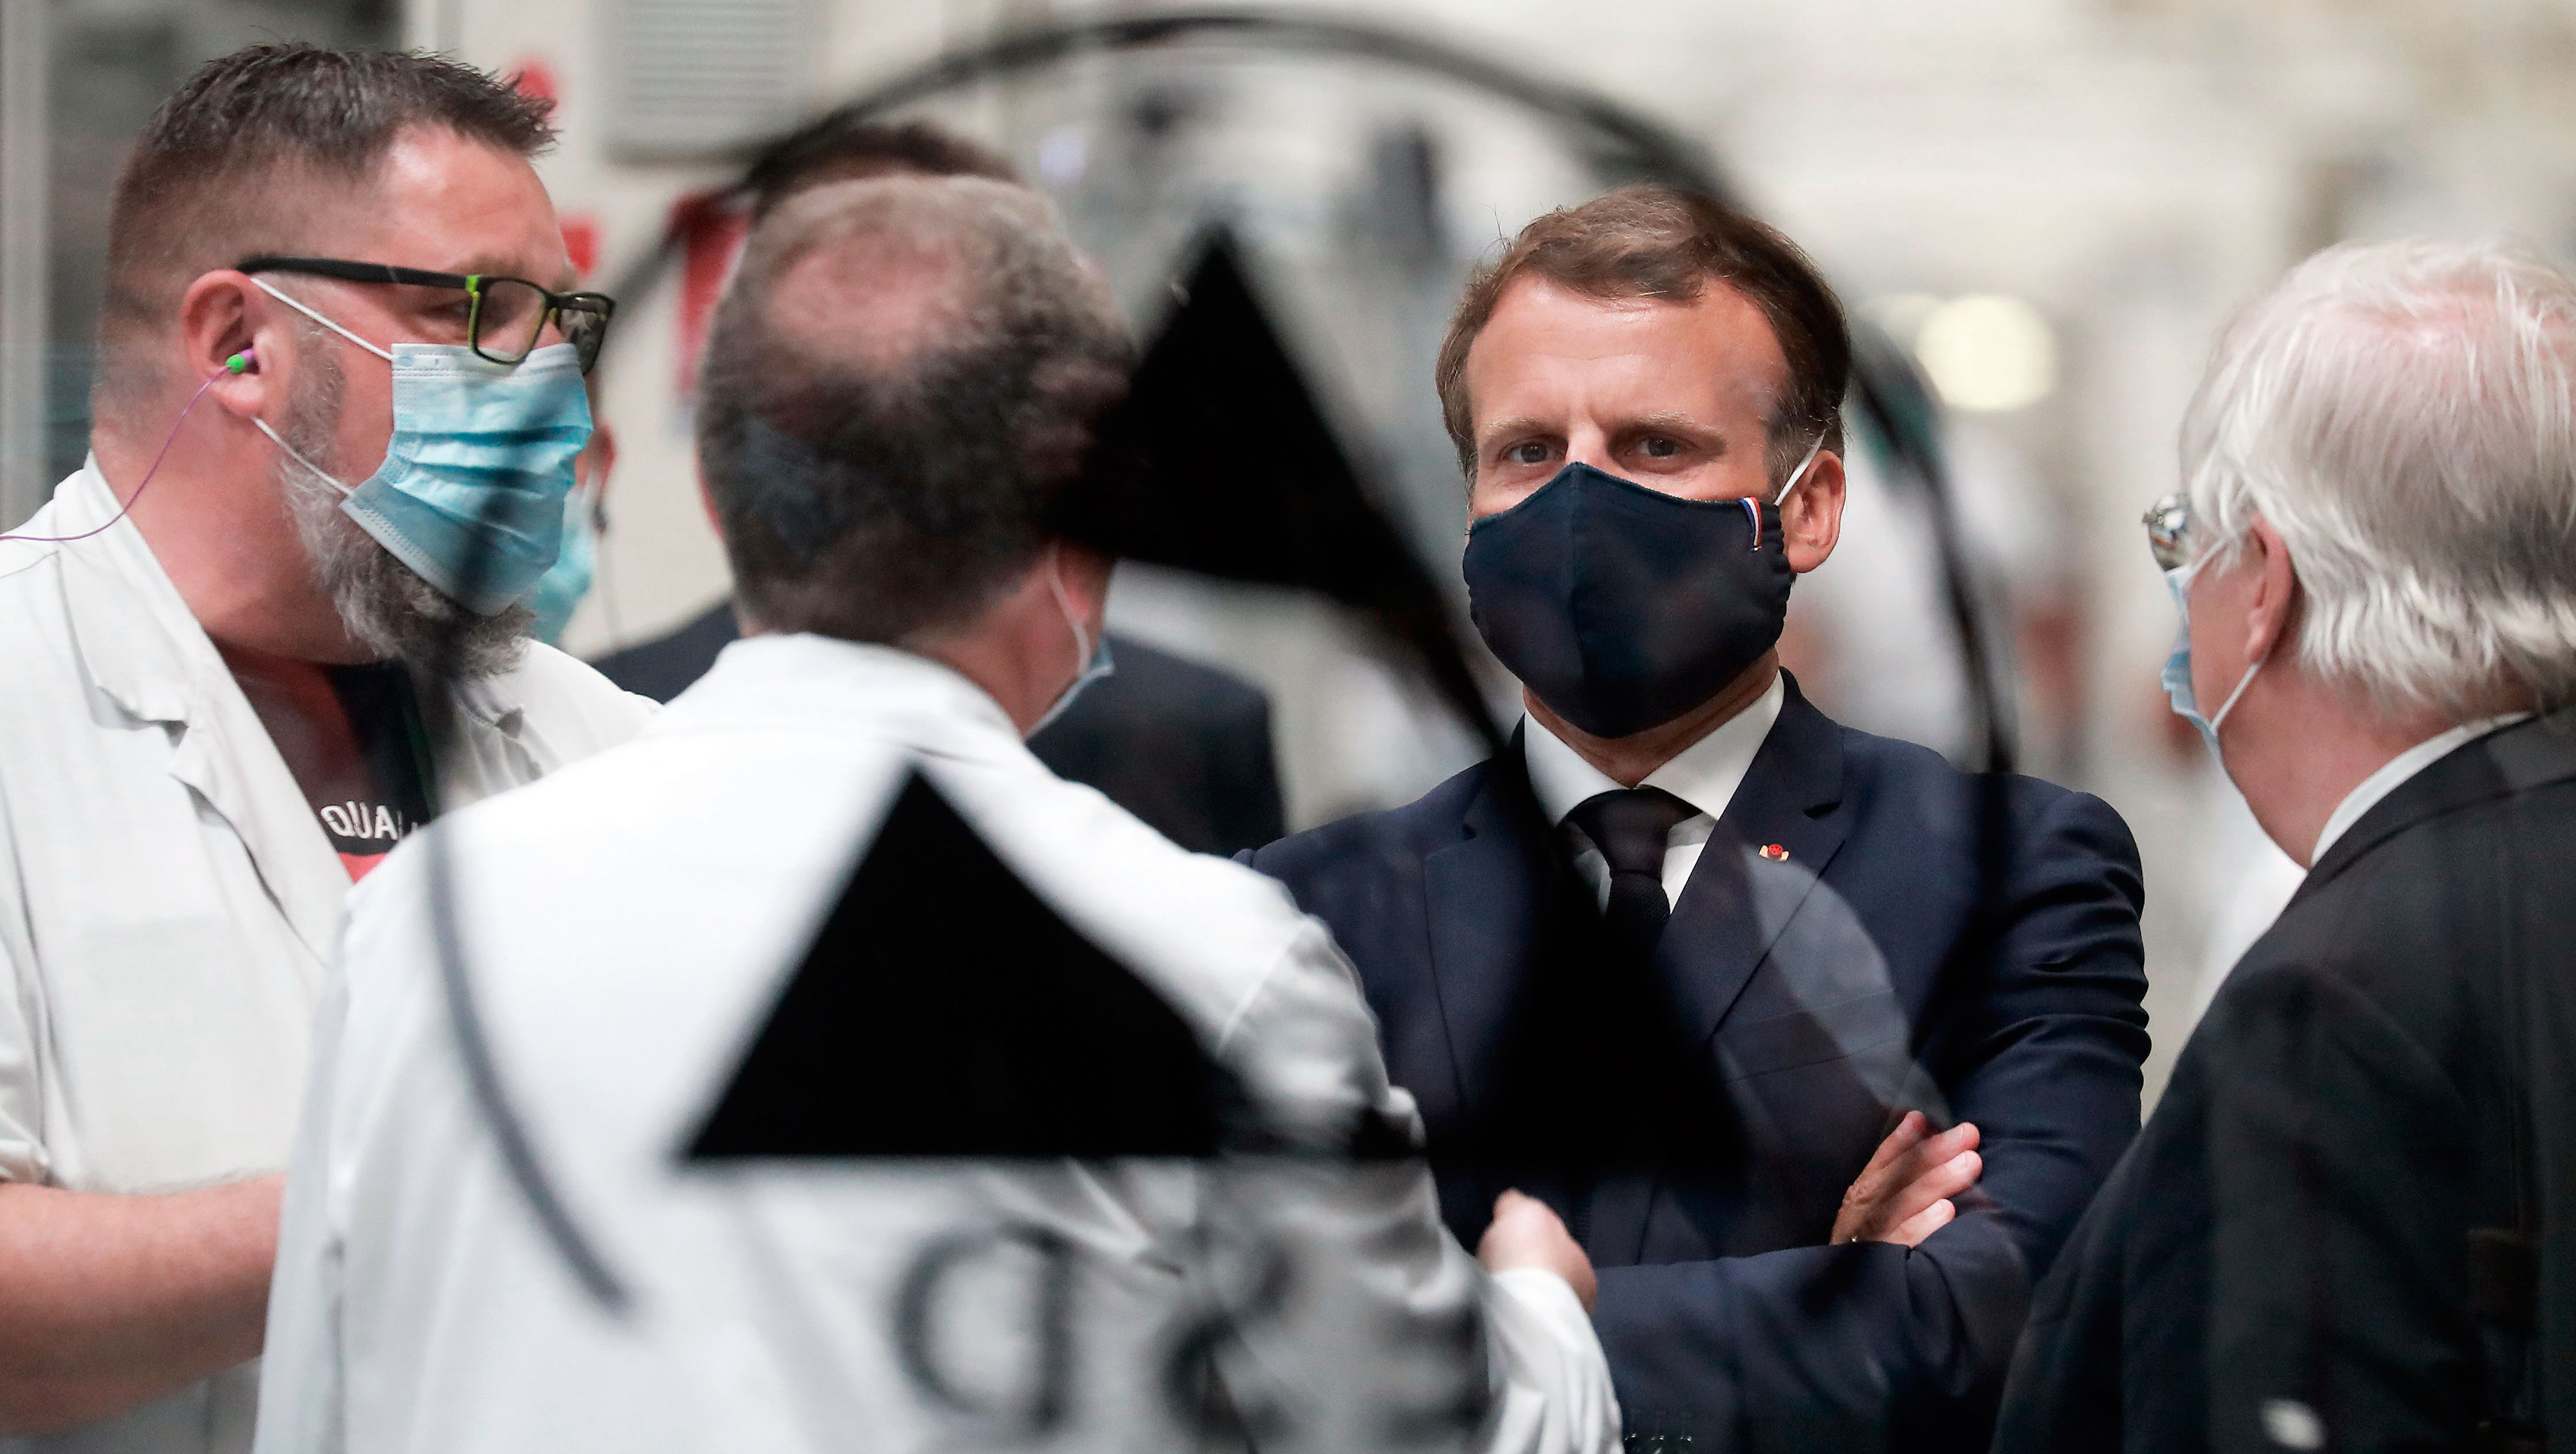 President Macron wearing a mask during a visit to a car factory